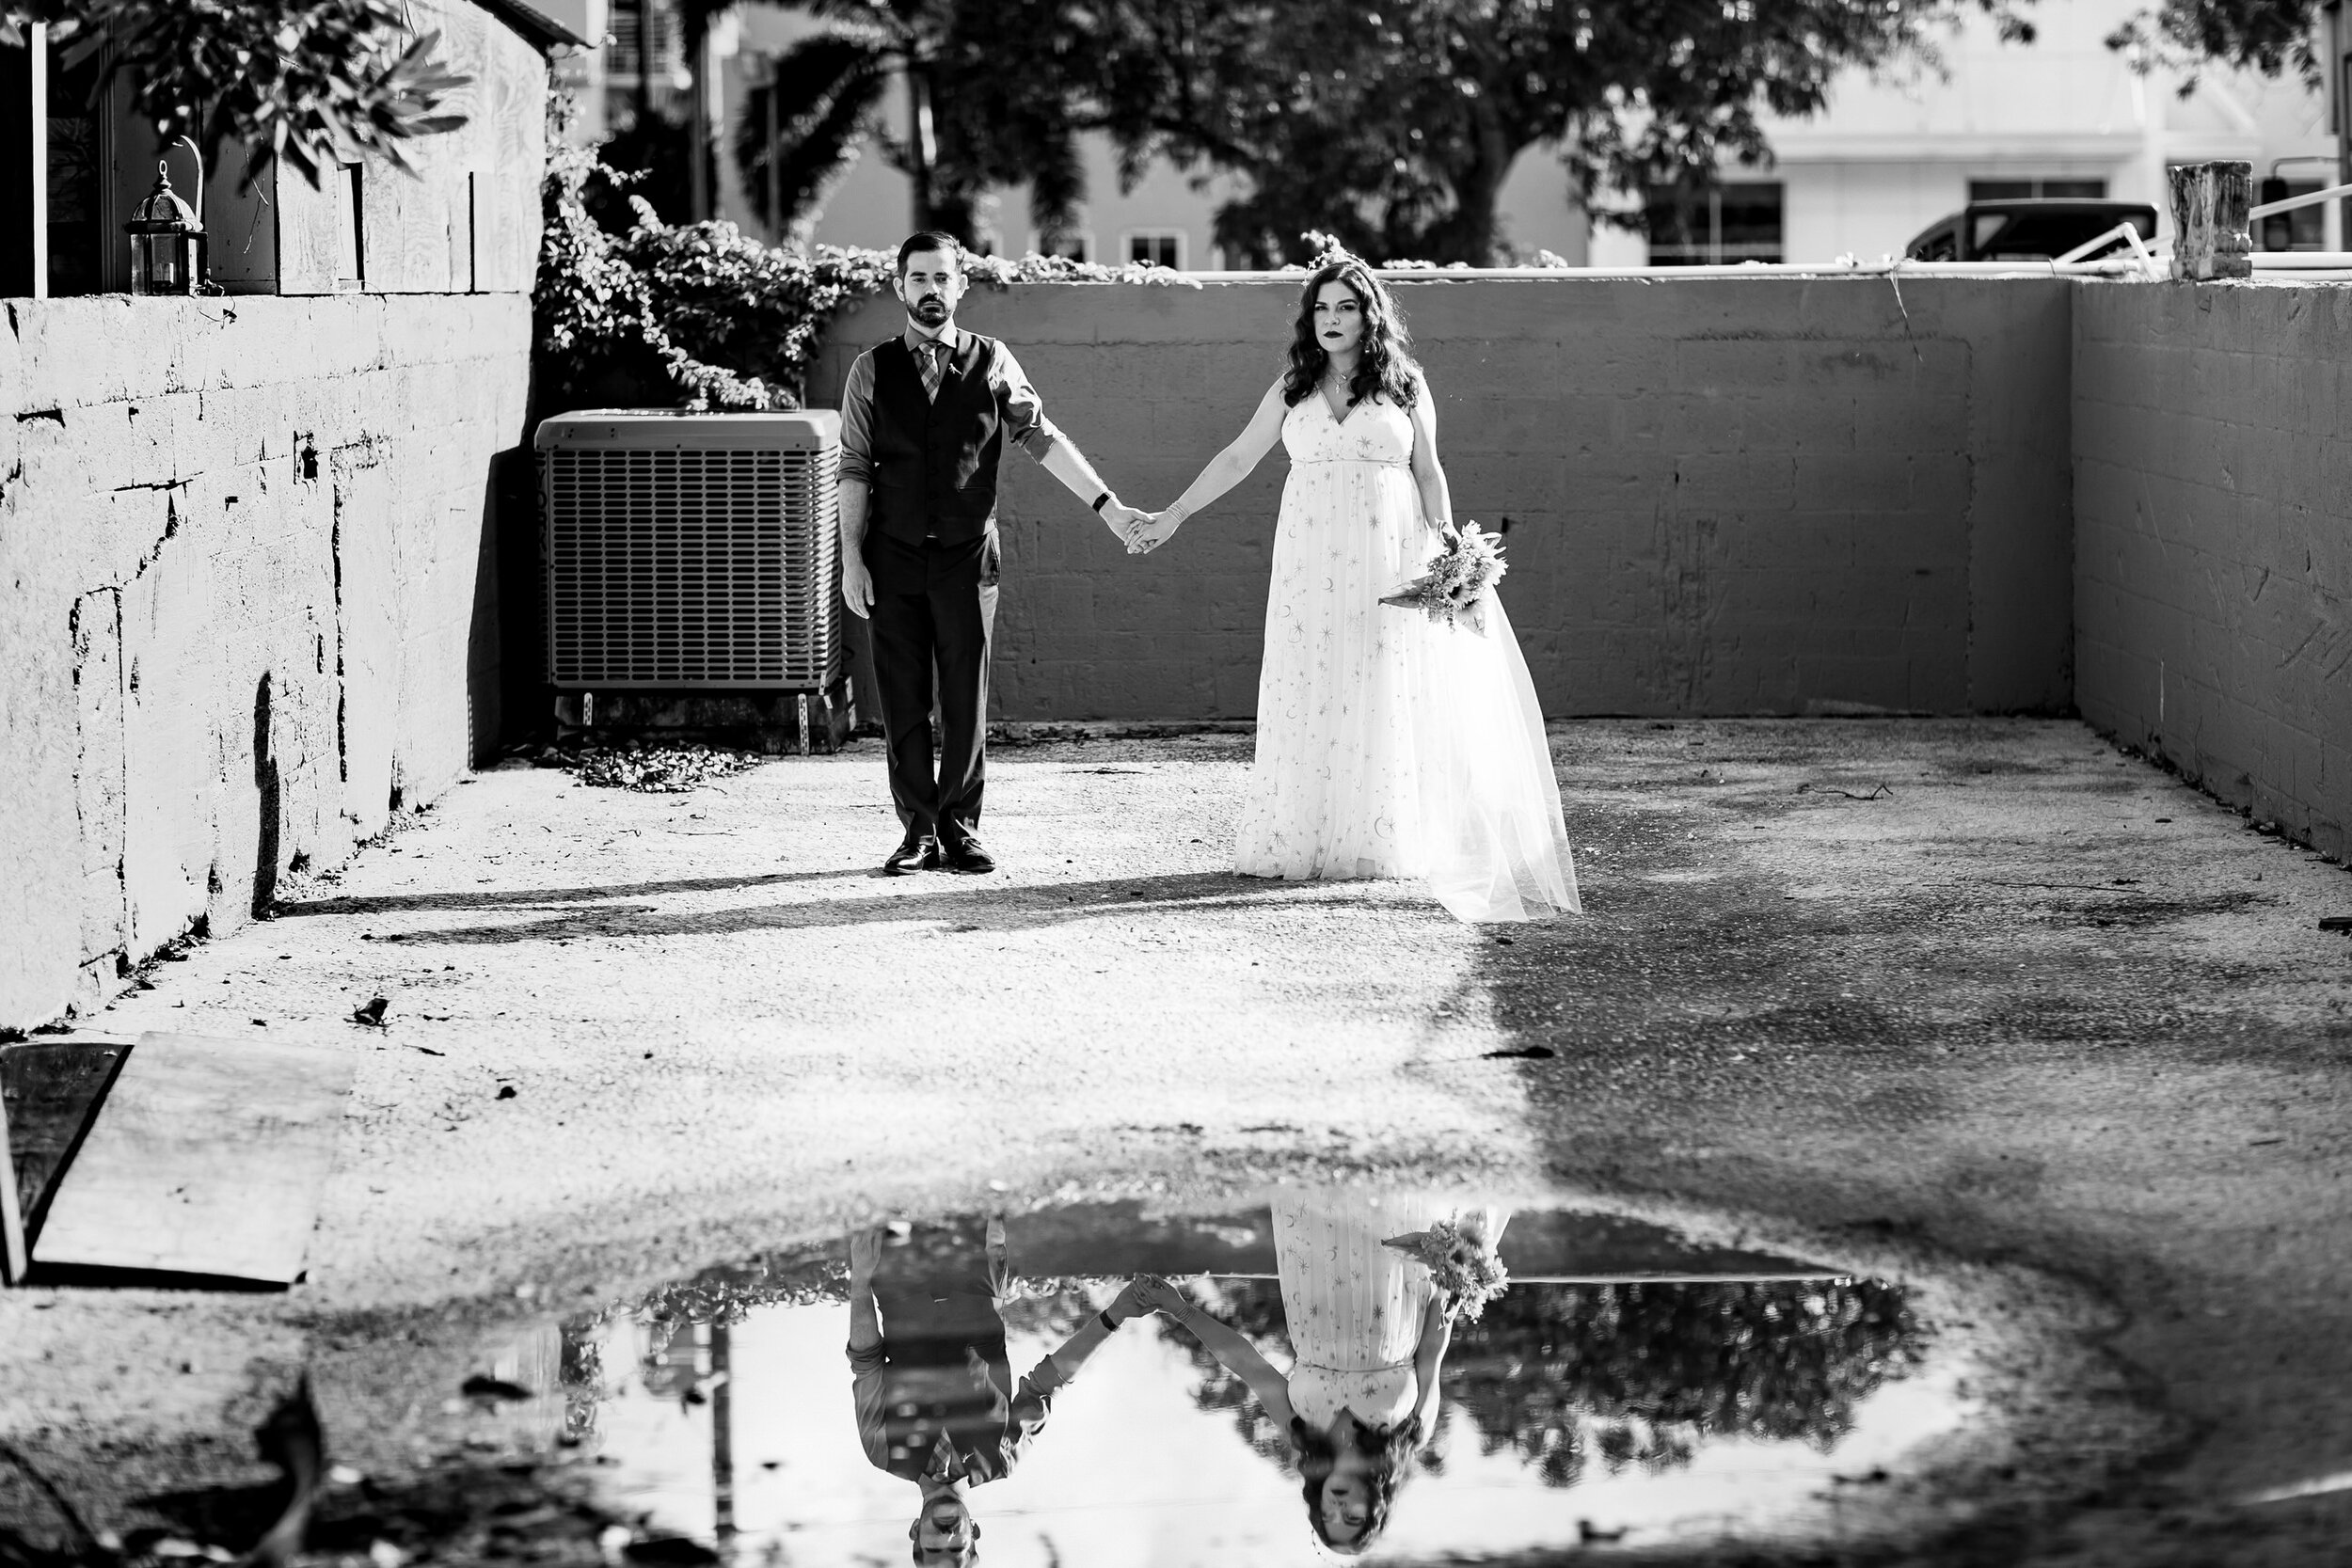 Florida-Non-Traditional-Wedding-Photography-Bride-Groom-Holding-Hands-Urban-Puddle-Reflection